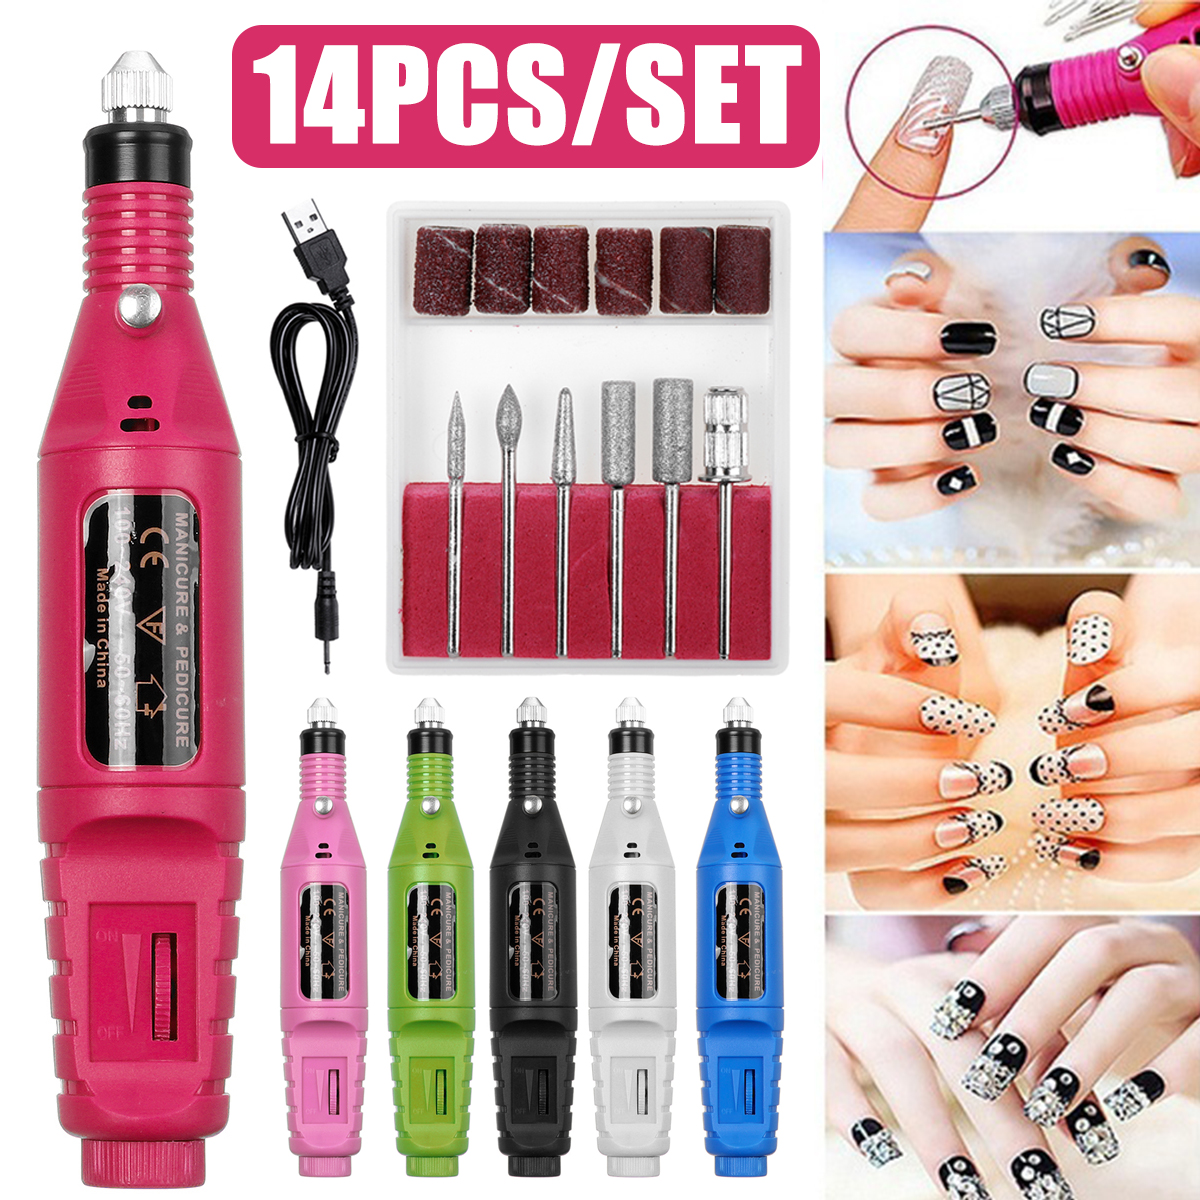 0-20000RPM-6-Color-USB-Charging-Electric-Nail-Grinder-Drill-Portable-Manicure-Pedicure-Nail-Machine--1764630-1